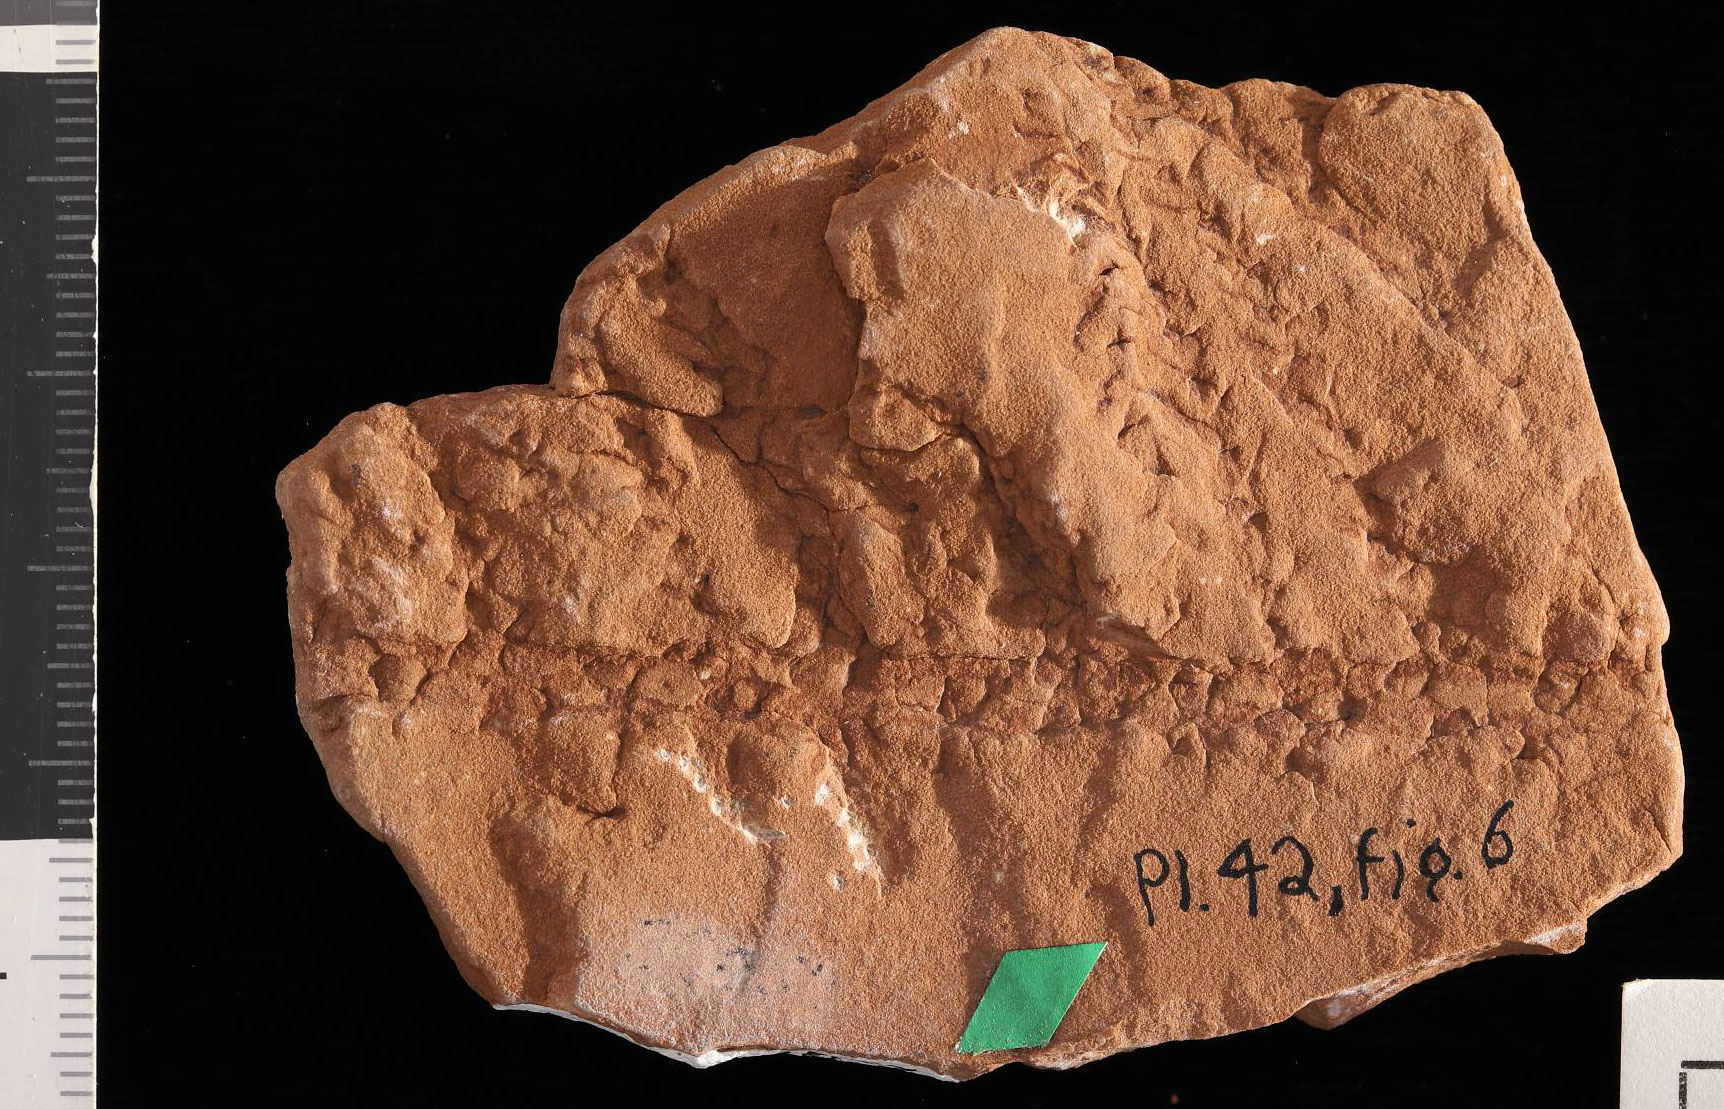 Photograph of a fossil conifer branch from the Permian Hermit Shale of Arizona. The fossil is preserved in a medium-orange rock on which the impression of a branch with lateral branches given off on its right side are preserved. Impressions of scale or needle leaves are also present.